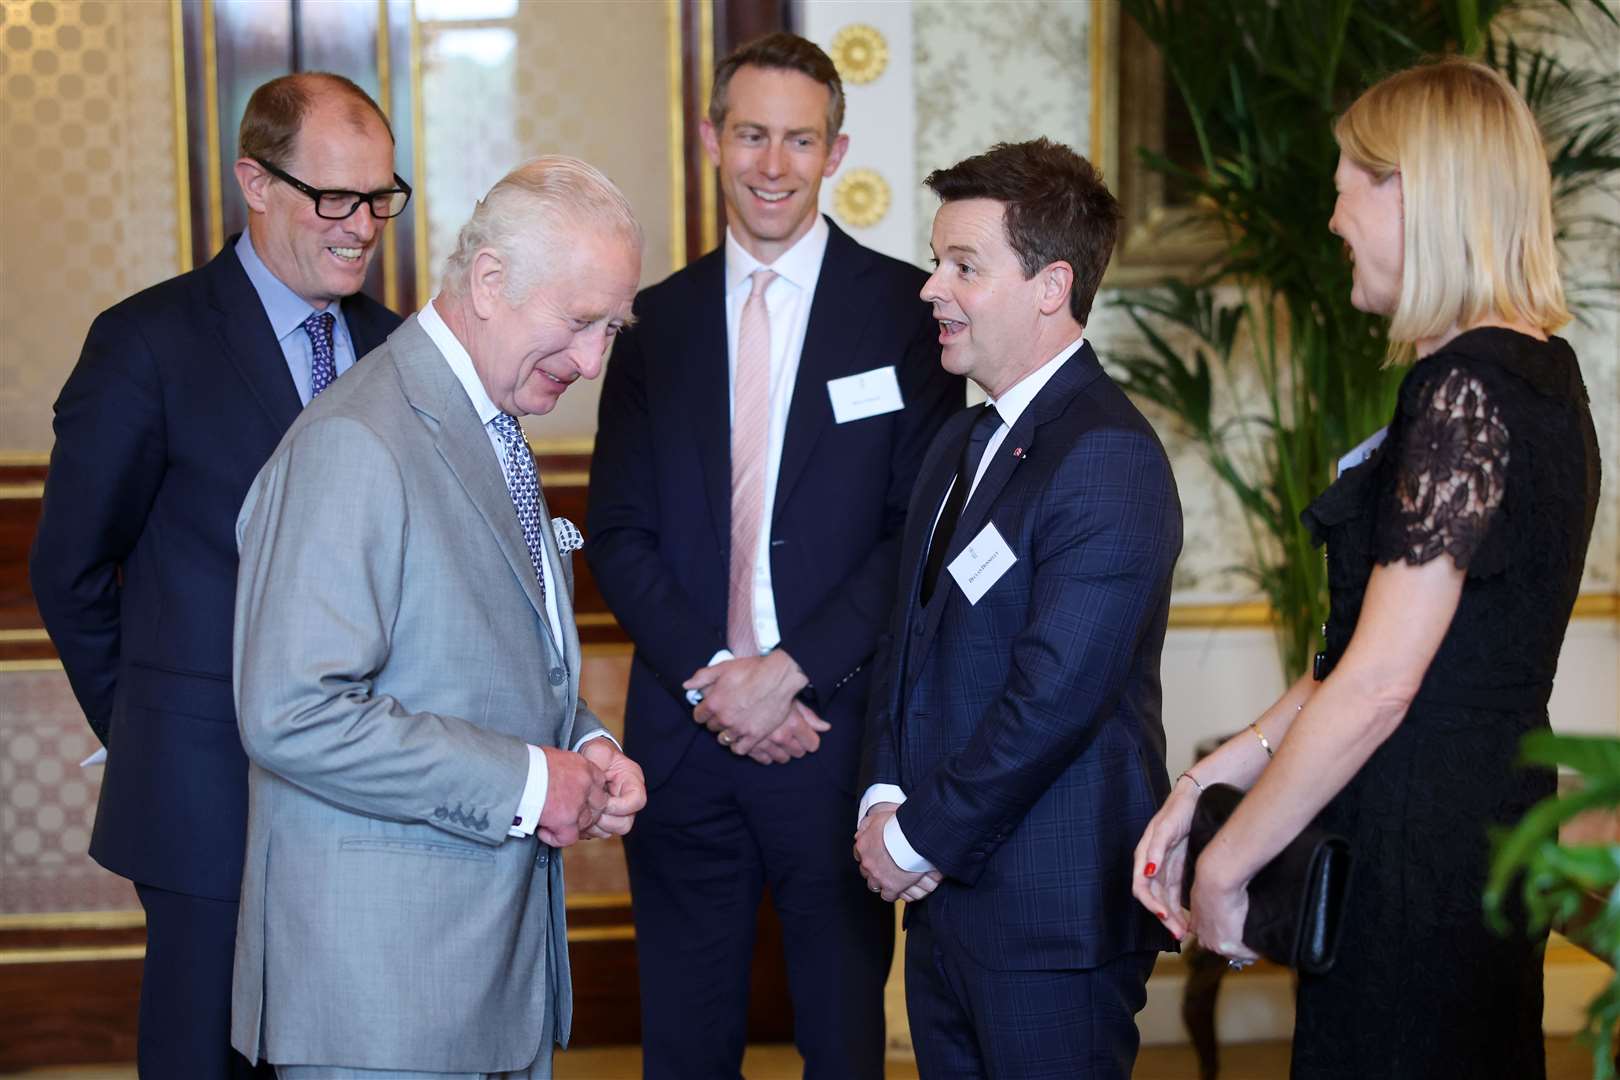 The King meeting TV presenter Declan Donnelly and his wife Ali Astall at a Prince’s Trust event at the Palace earlier on Wednesday (Chris Jackson/PA)